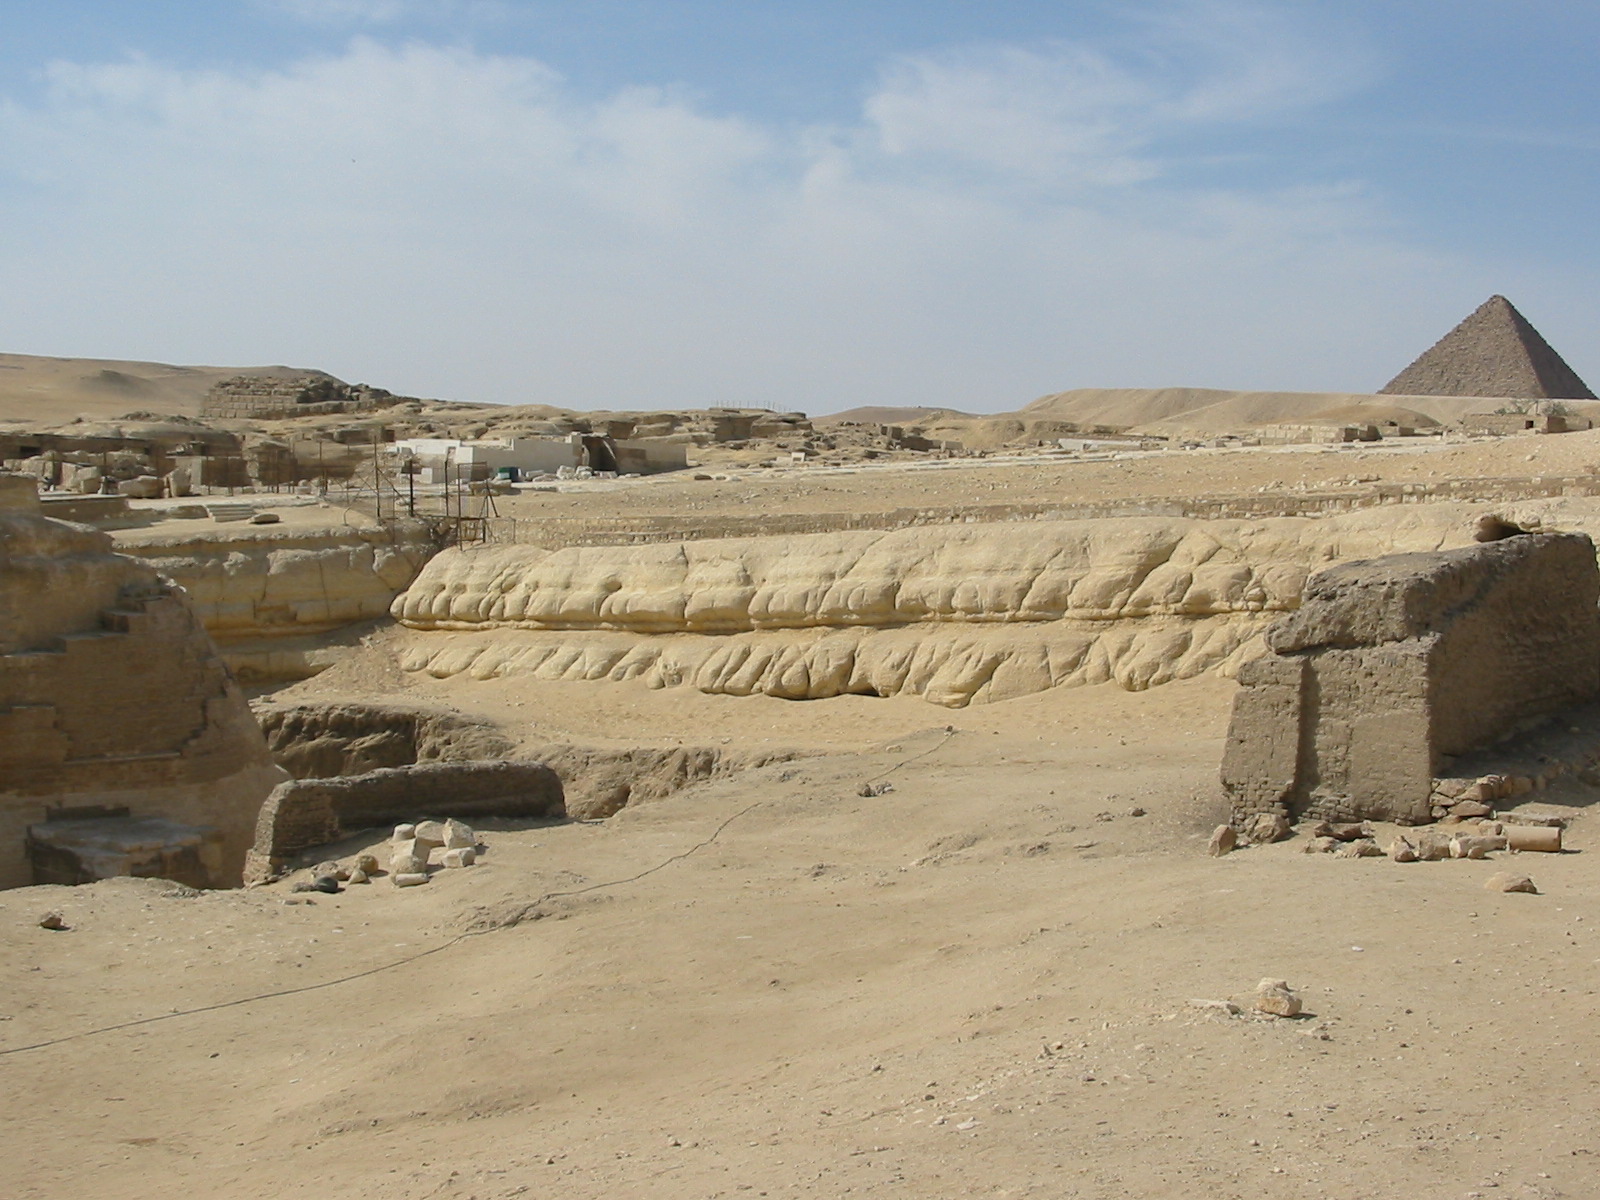 the western wall of the sphinx enclosure, showing erosion consistently along its length